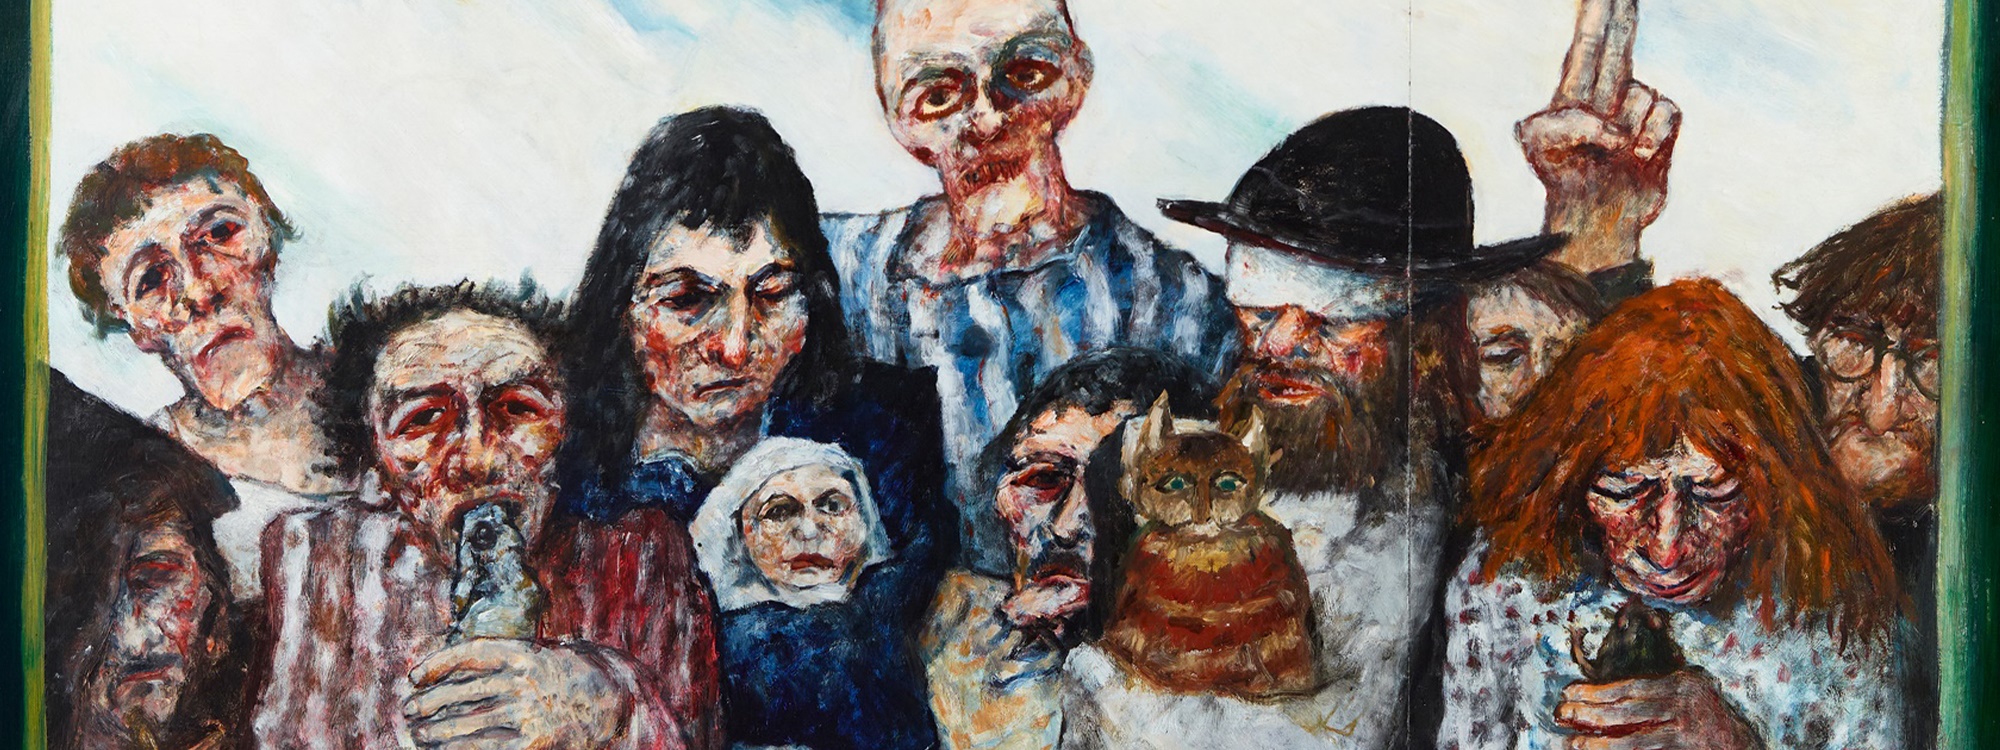 The Persecuted by John Bellany